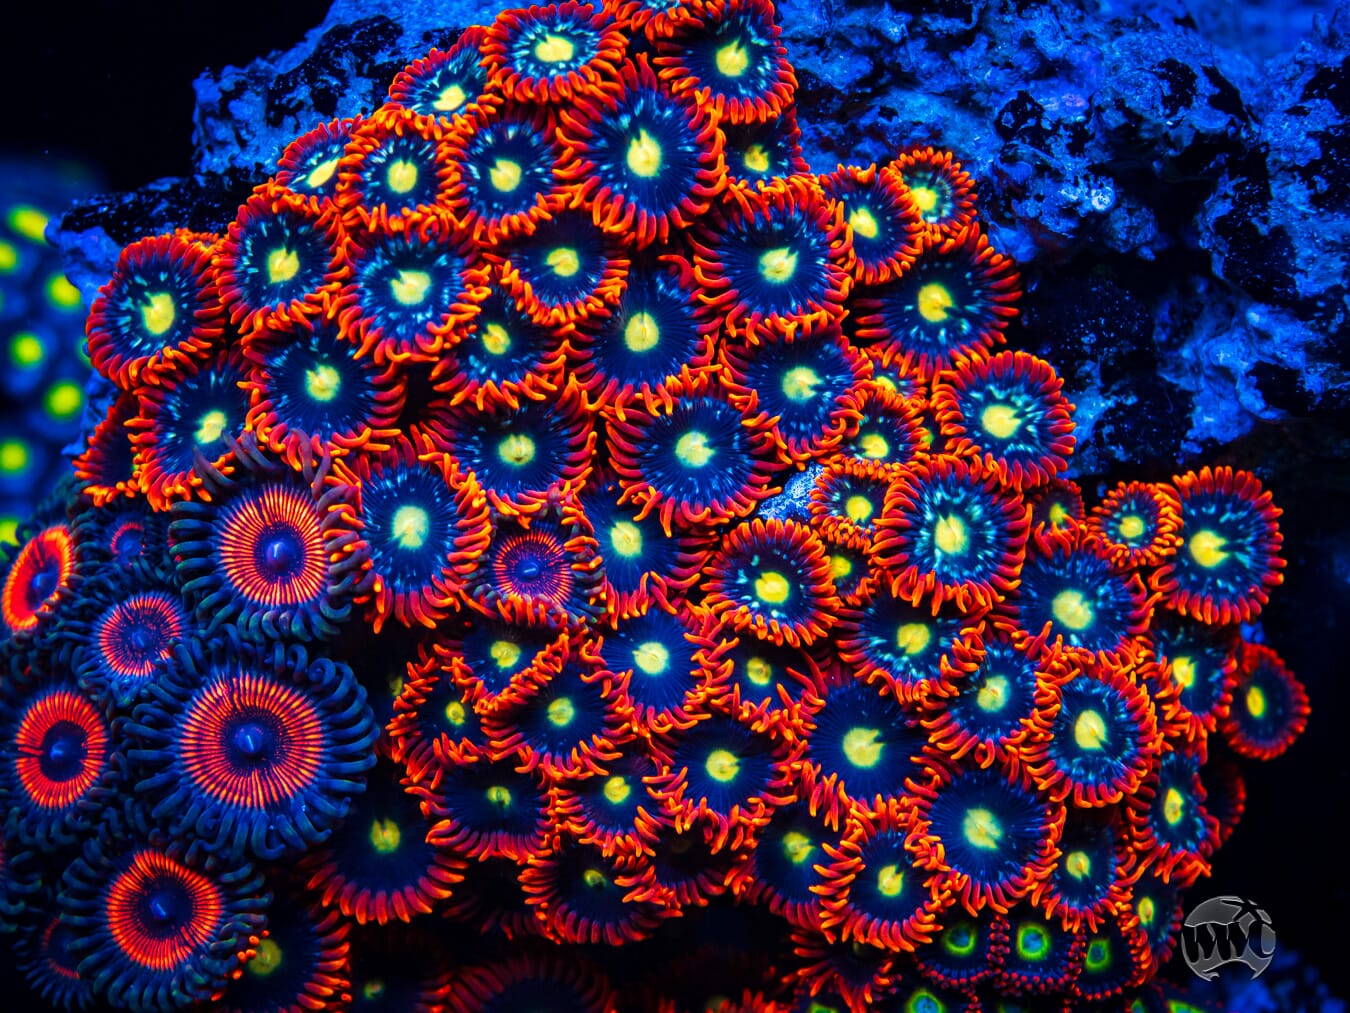 WWC Mandarin Monster Zoanthids - Mother Colony